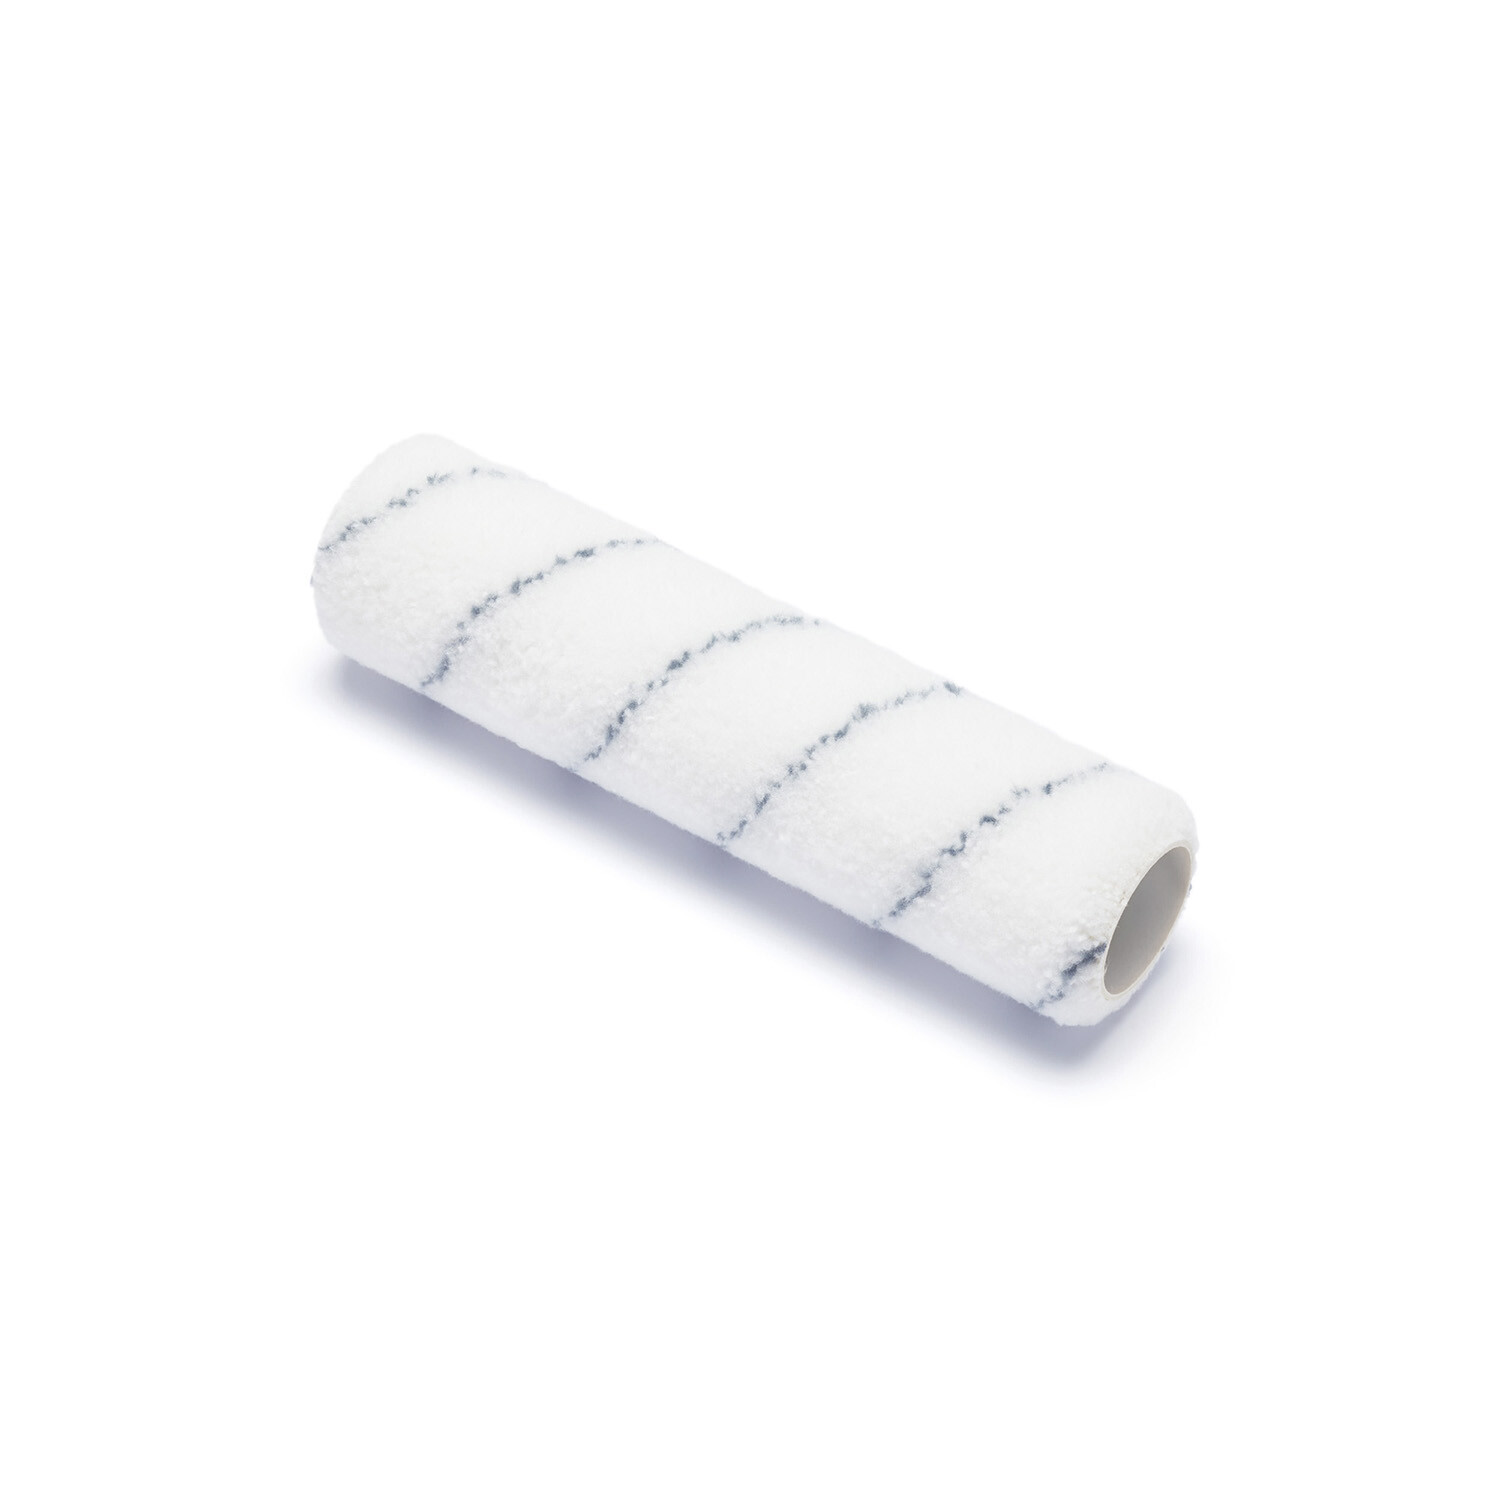 Harris 9 inch Seriously Good Walls and Ceilings Roller Sleeve Image 2